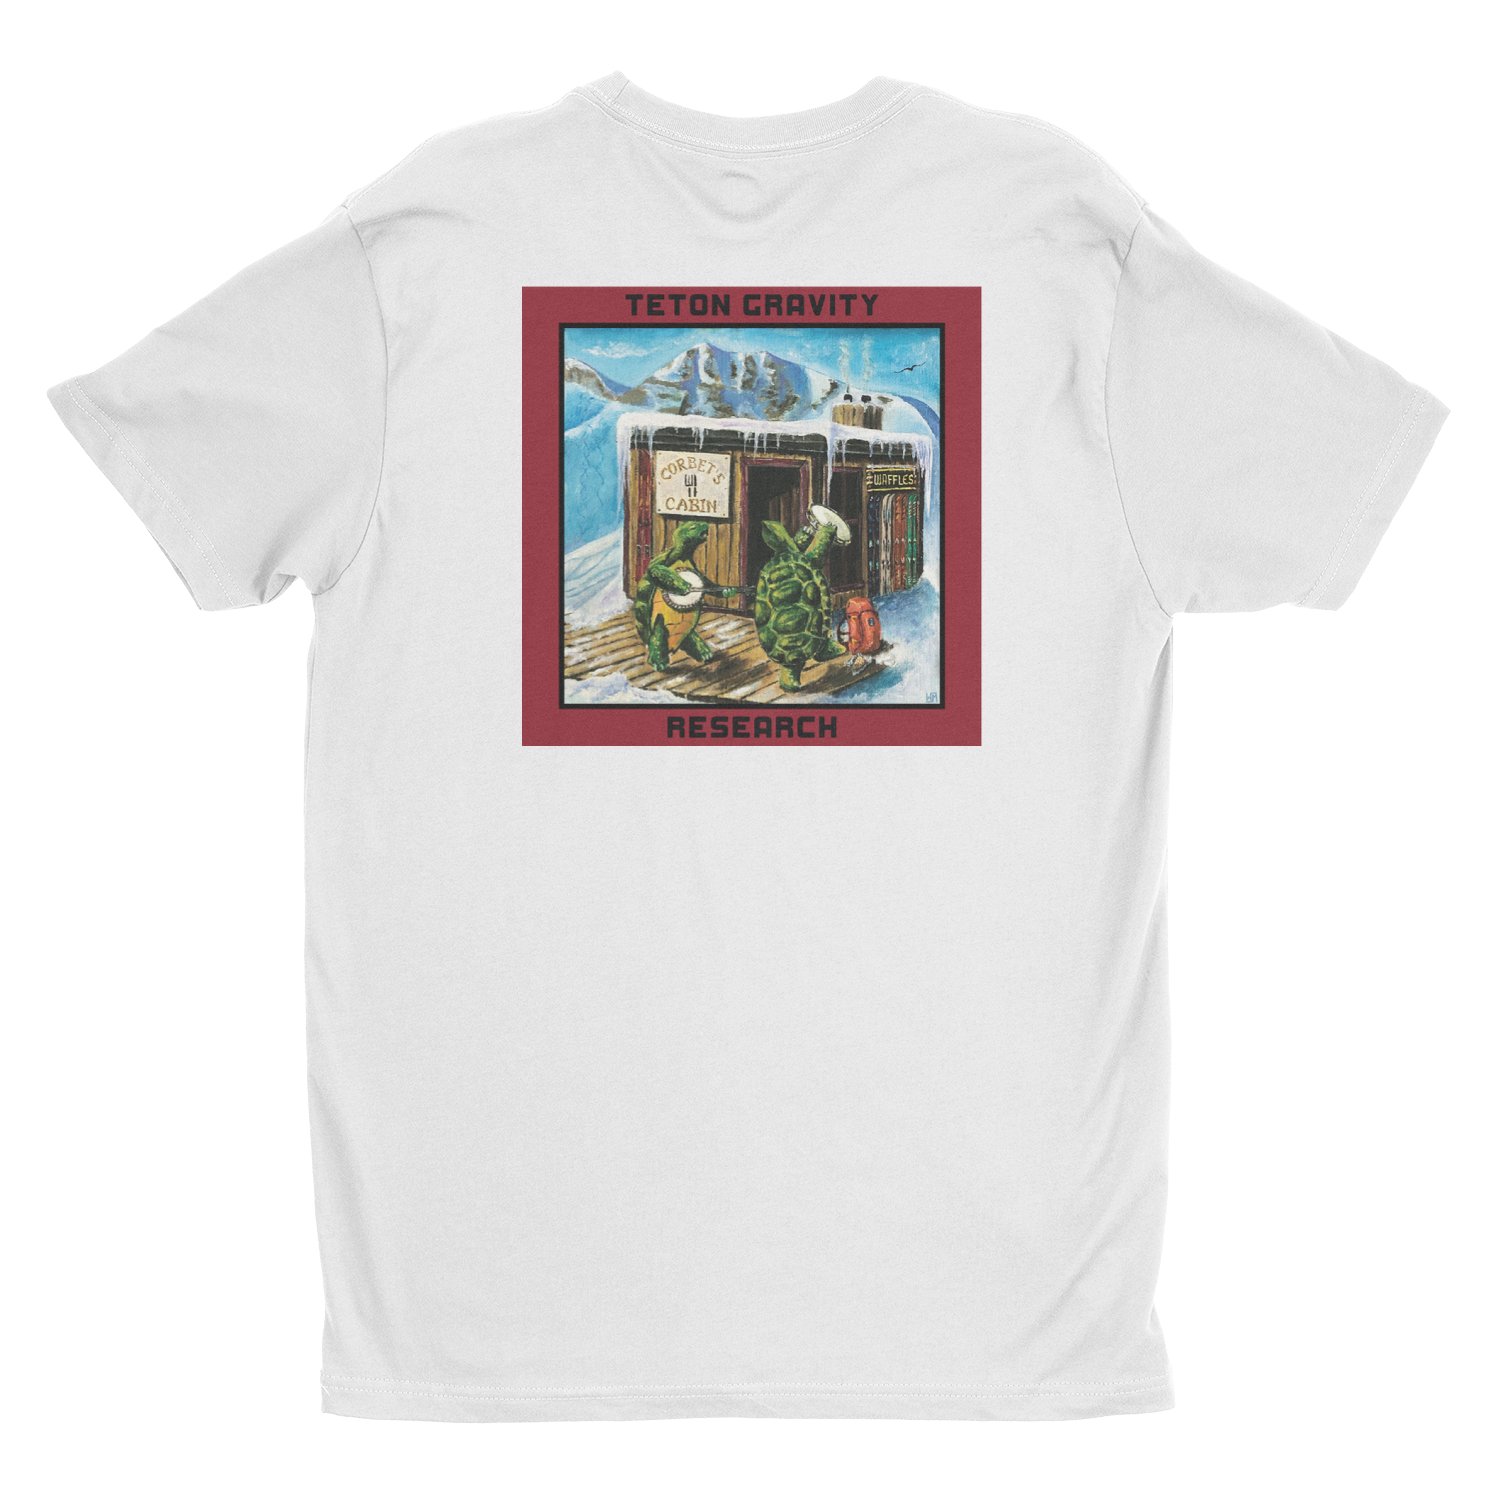 Grateful Dead x TGR "Corbet's Station" Tee by Will Munford